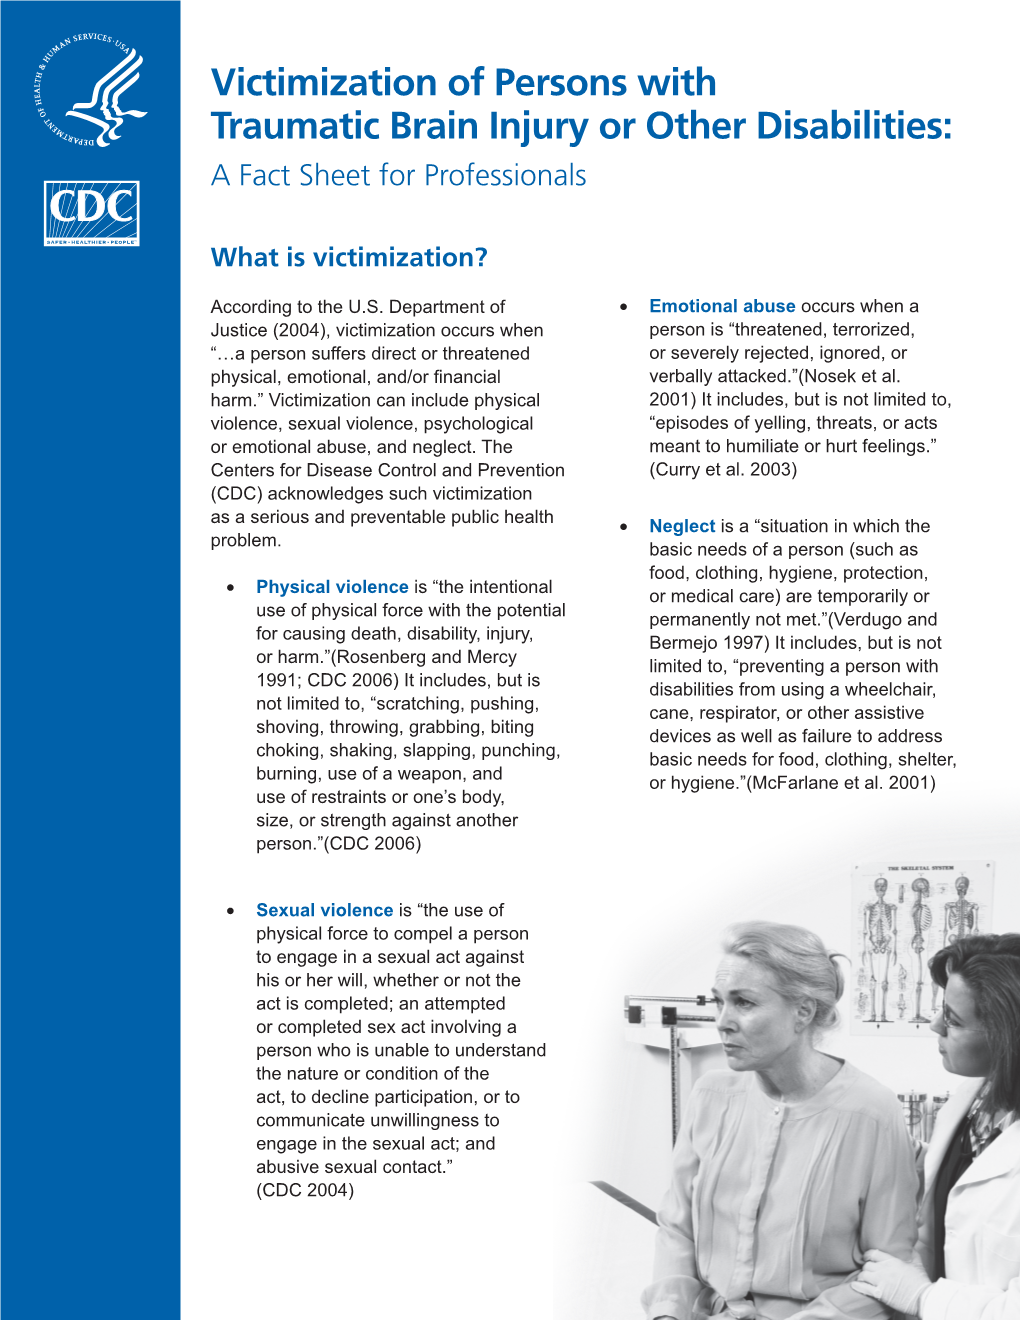 Victimization of Persons with Traumatic Brain Injury Or Other Disabilities: a Fact Sheet for Professionals